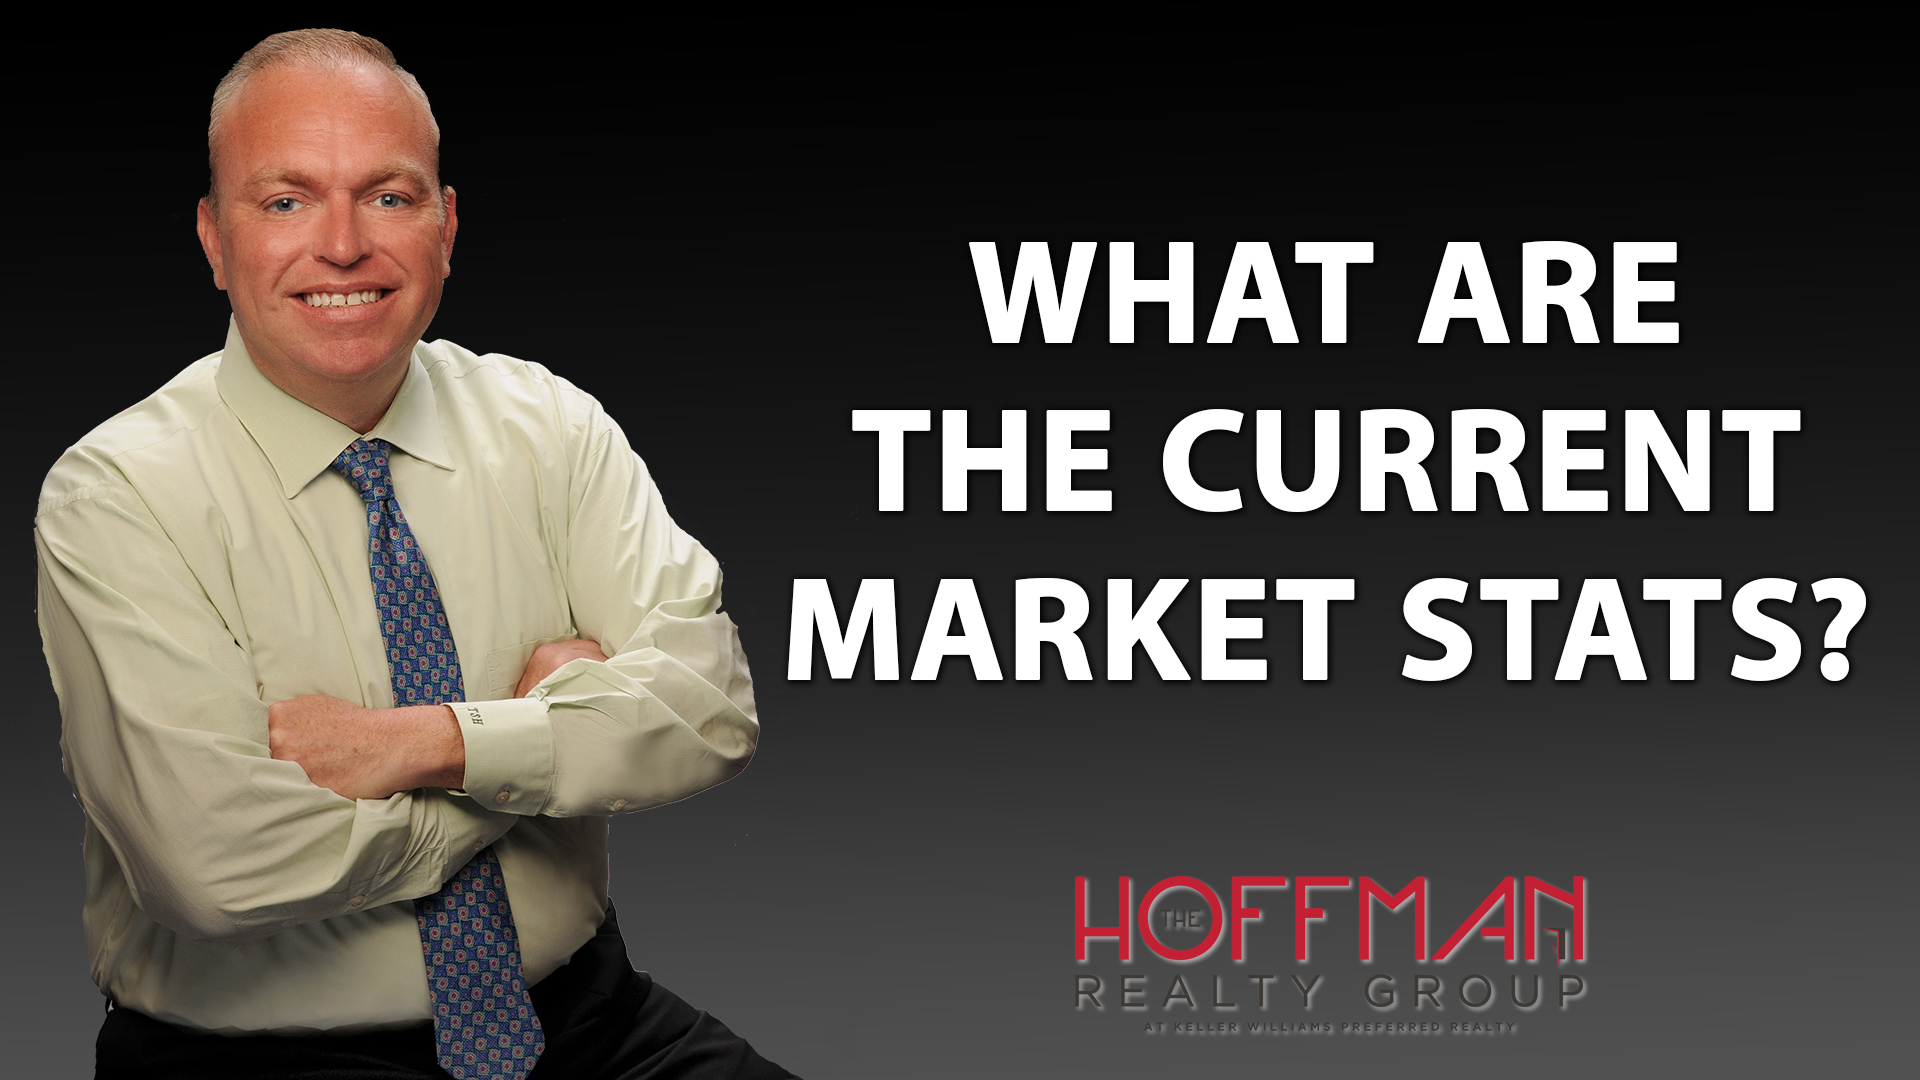 Our Johnston County Market Update